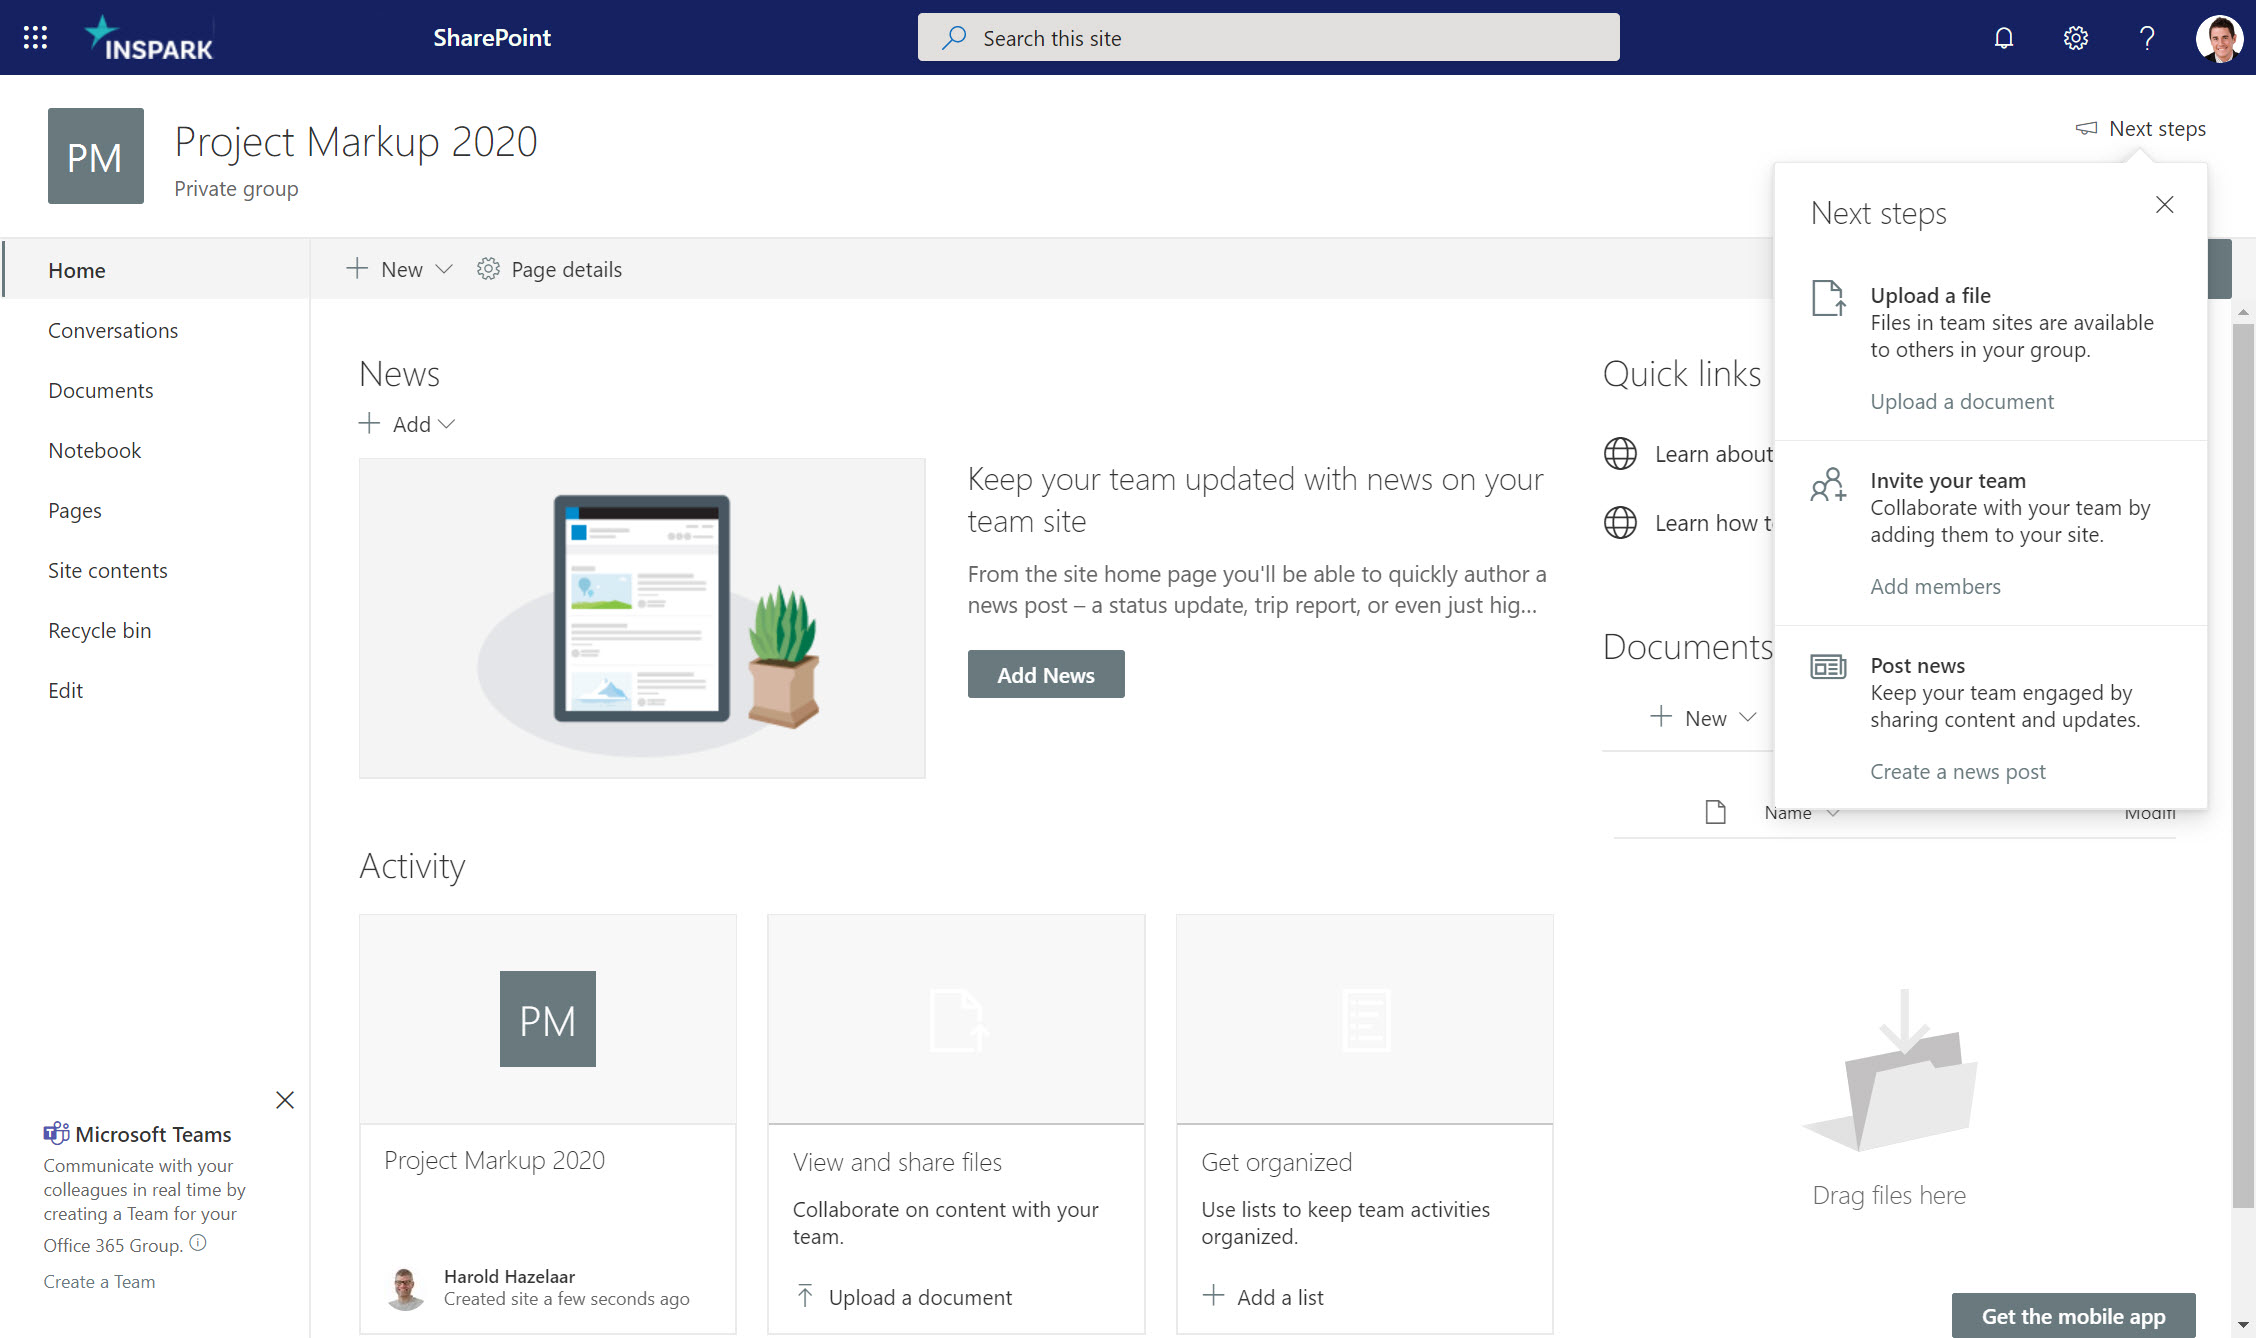 Next steps panel in SharePoint team sites.